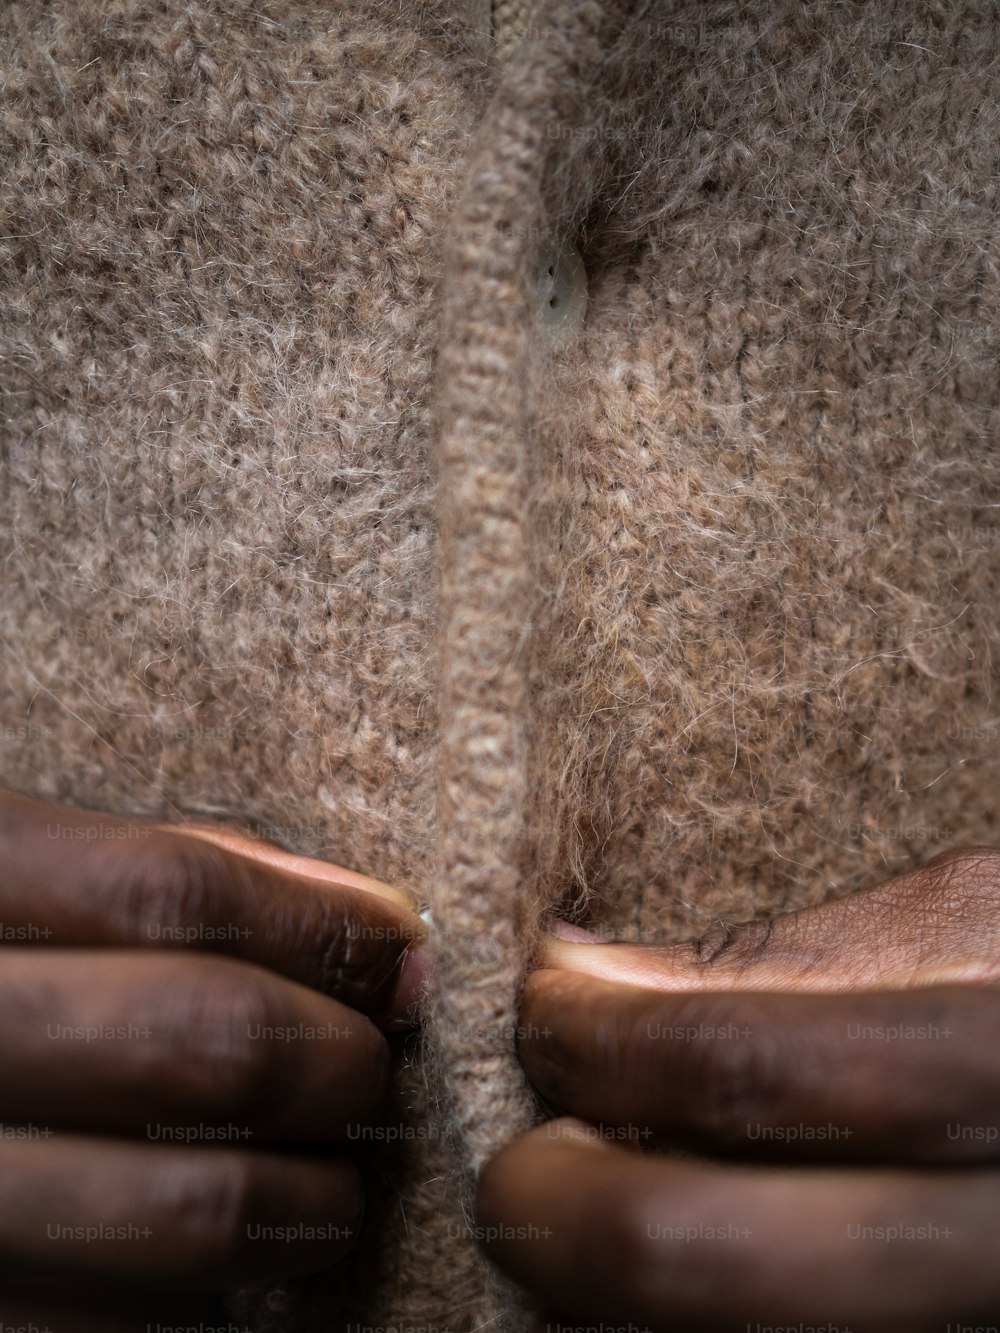 a close up of a person's hands holding something